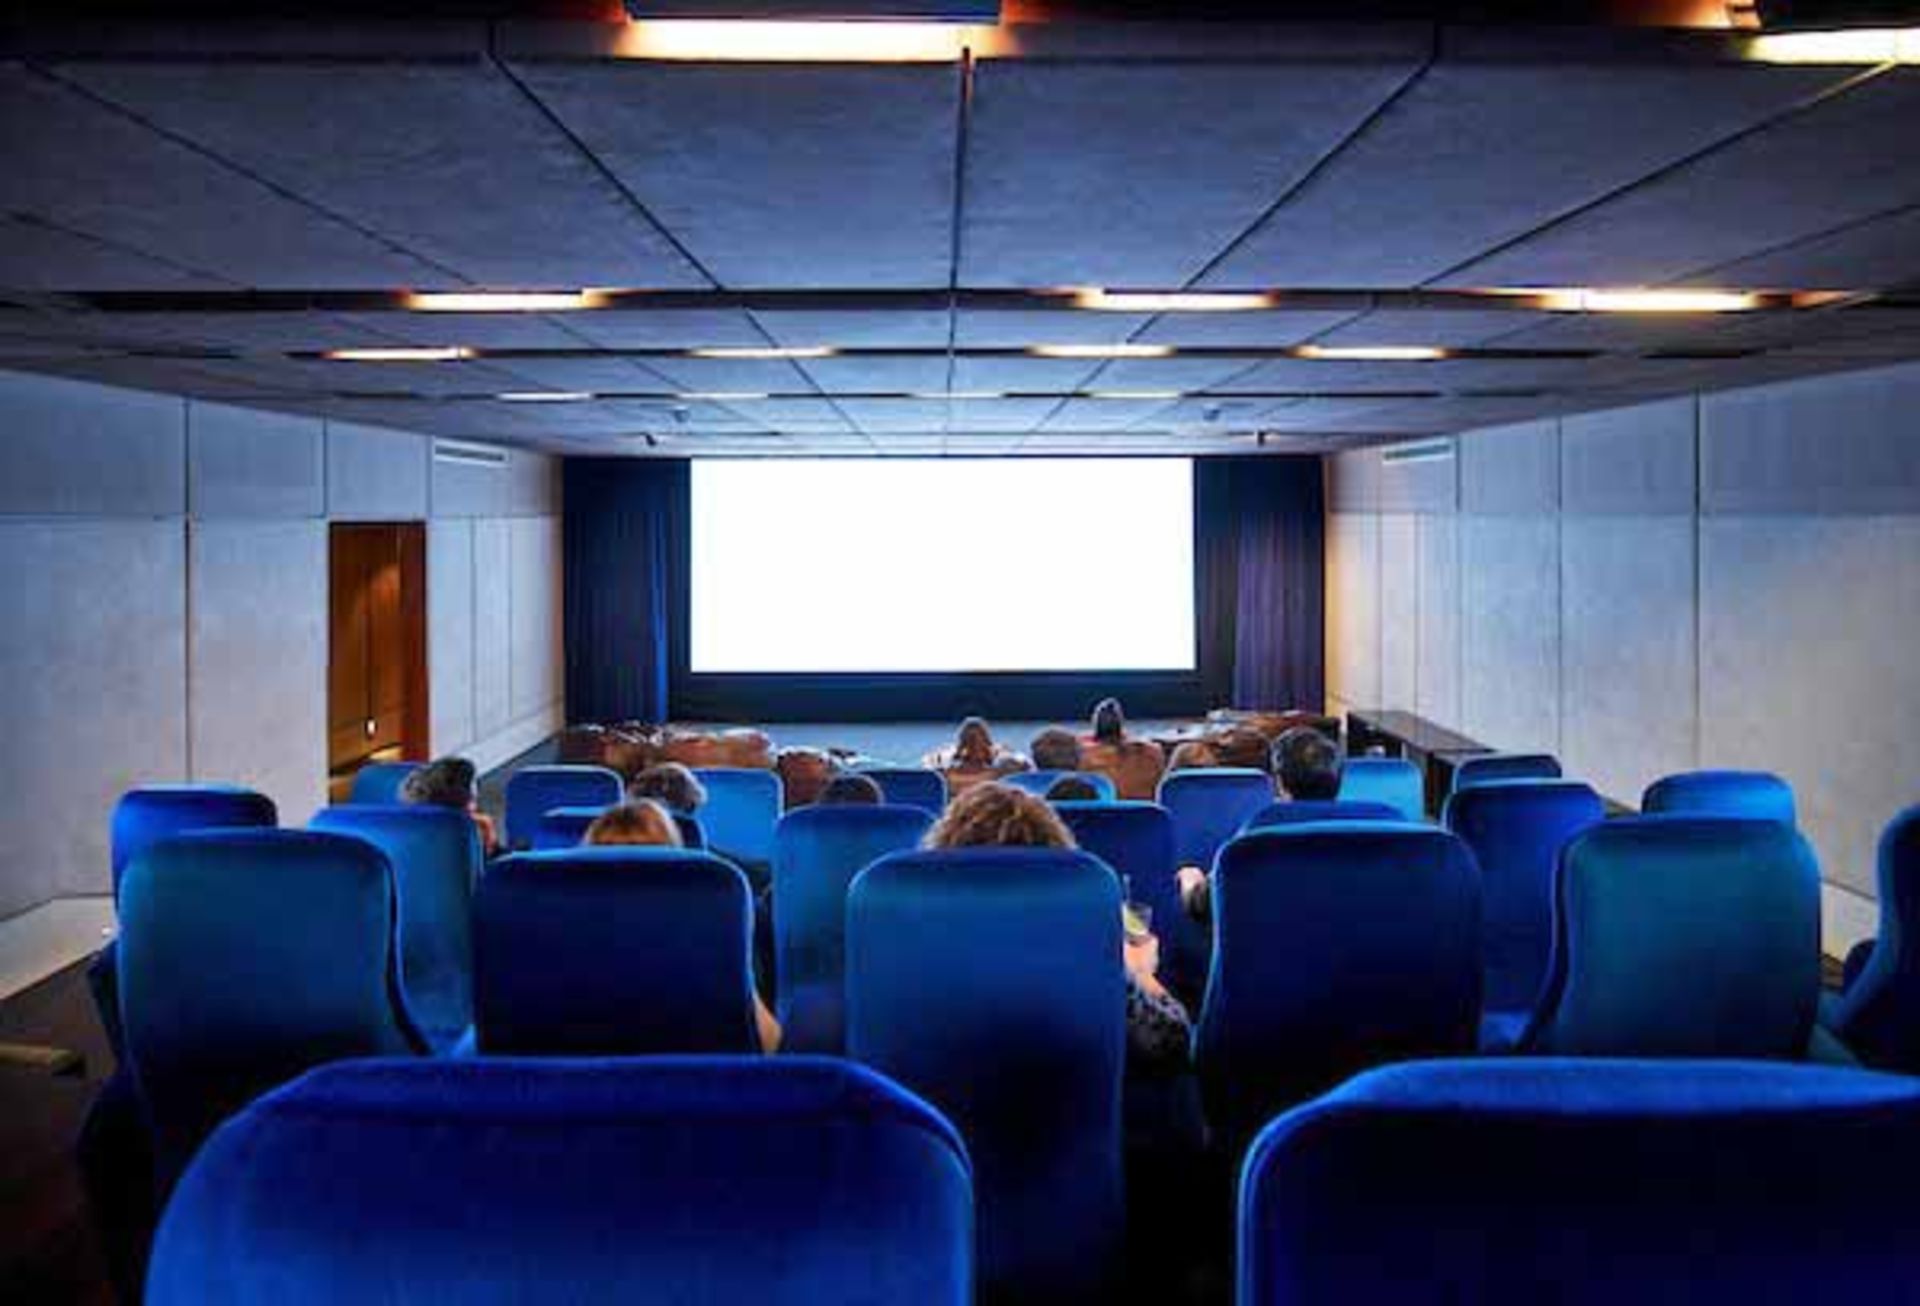 The Thirty Seat capacity Digital Movie Screening Facility to include Projectionists Room